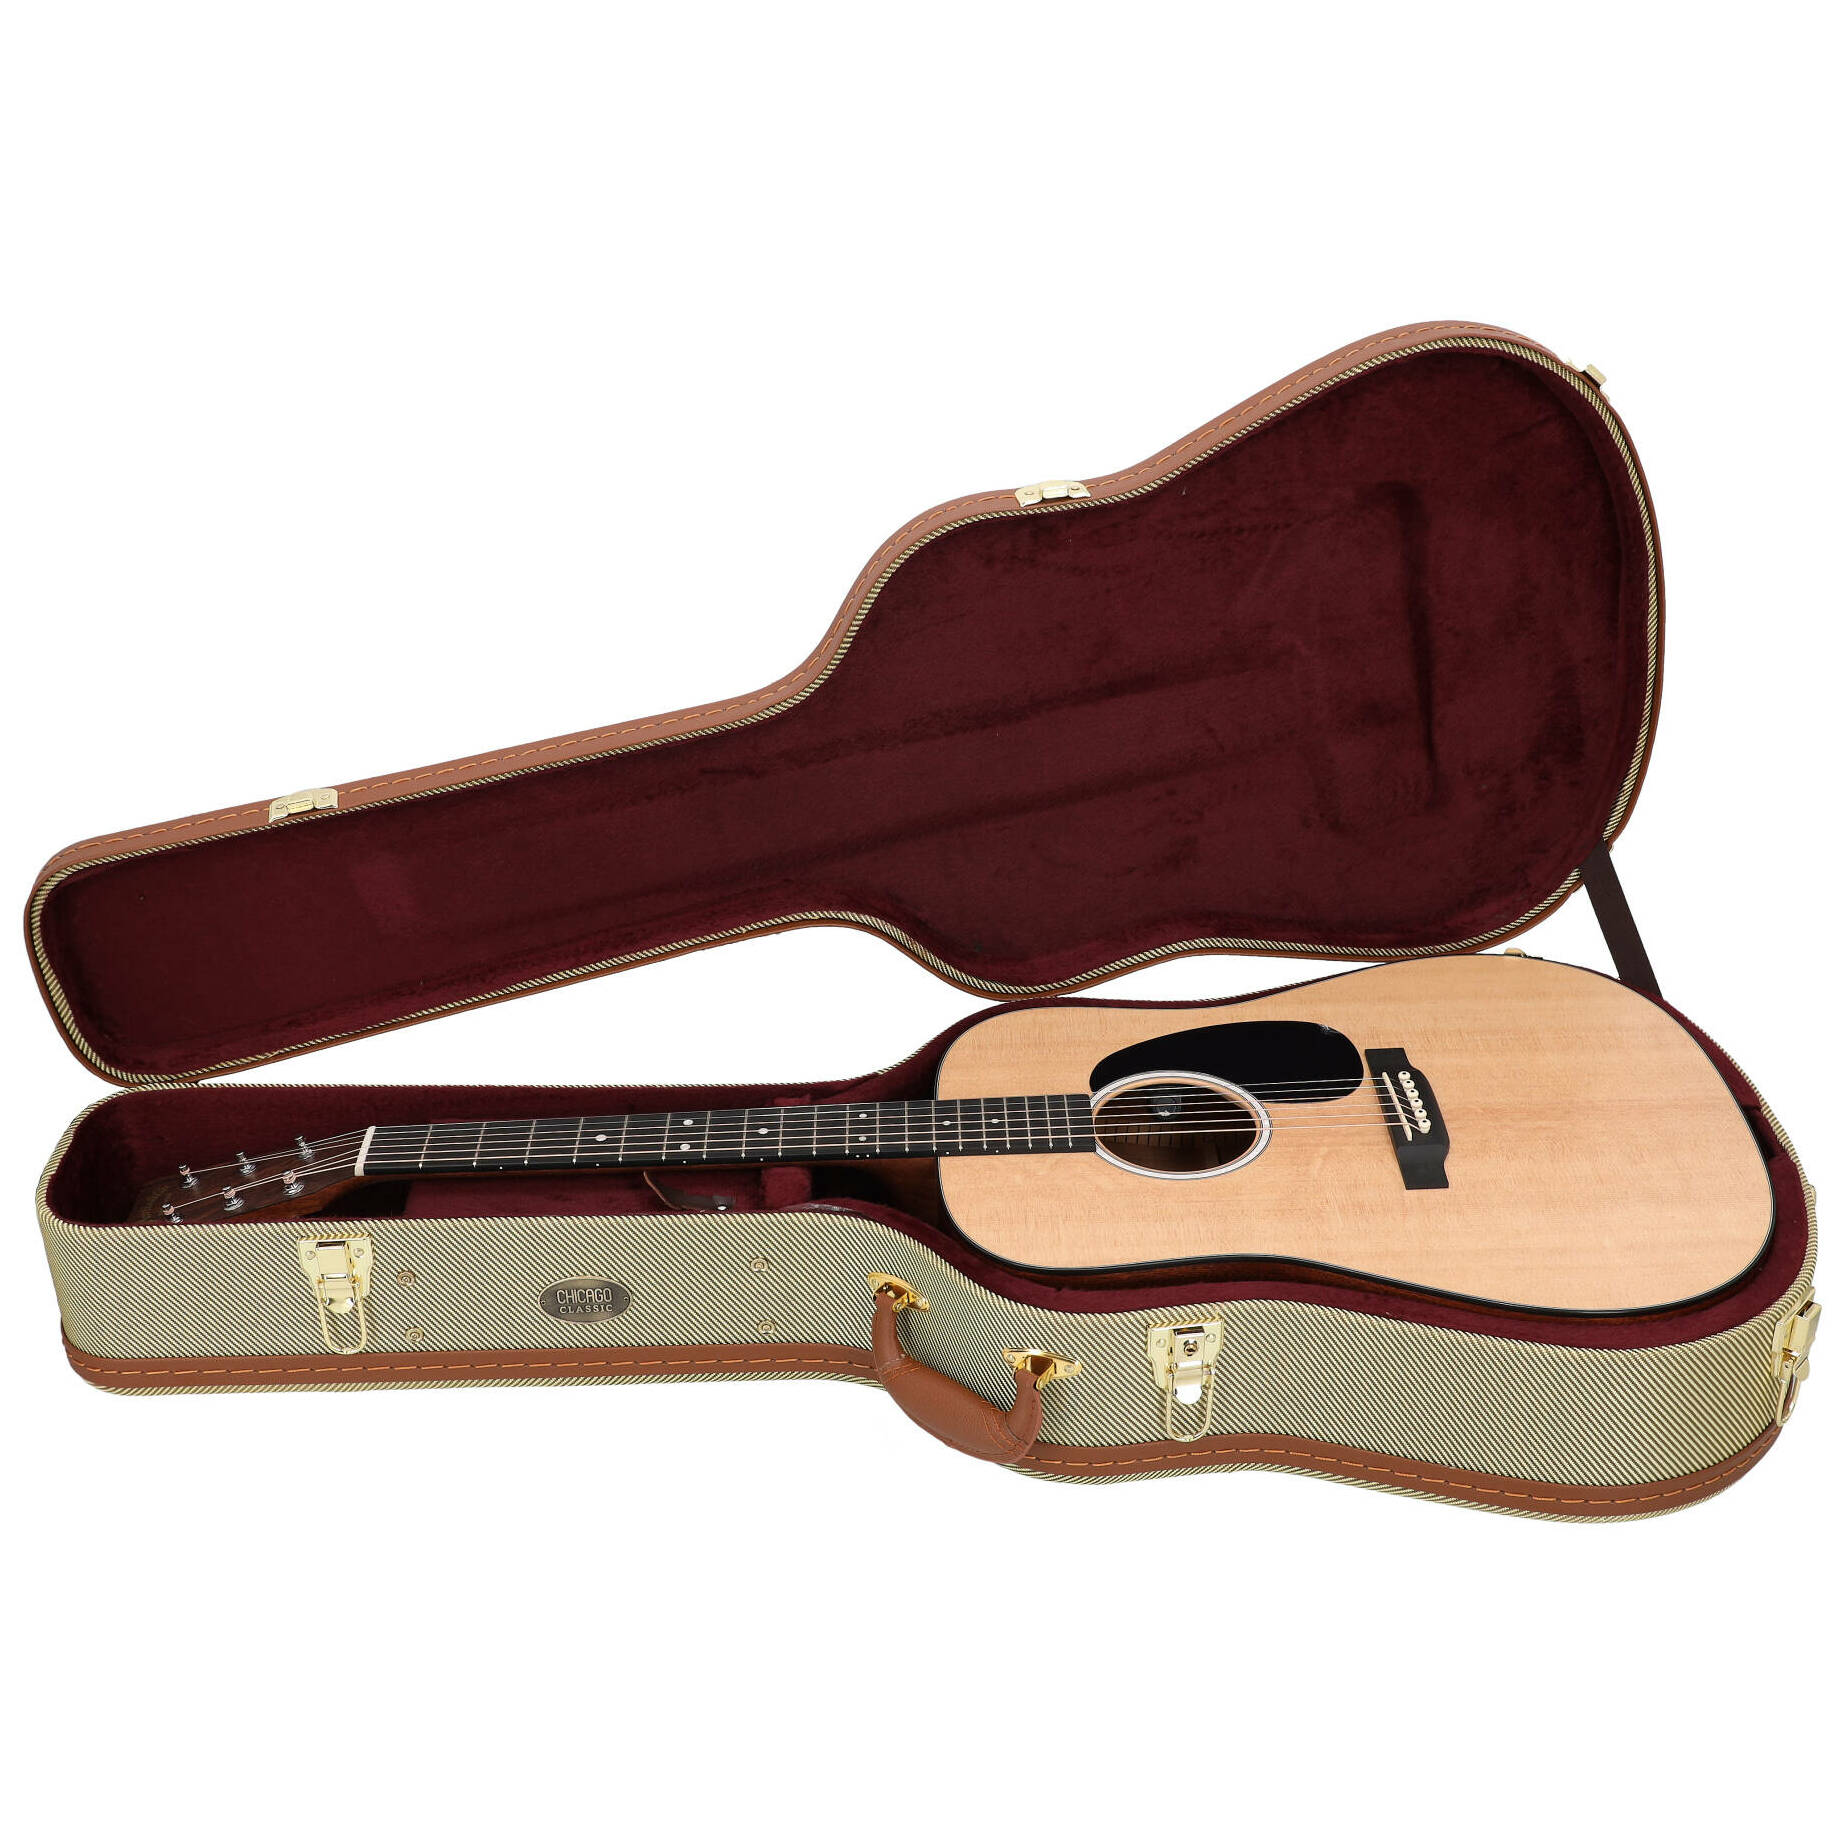 Chicago Classic Holzkoffer Dreadnought Tweed 4